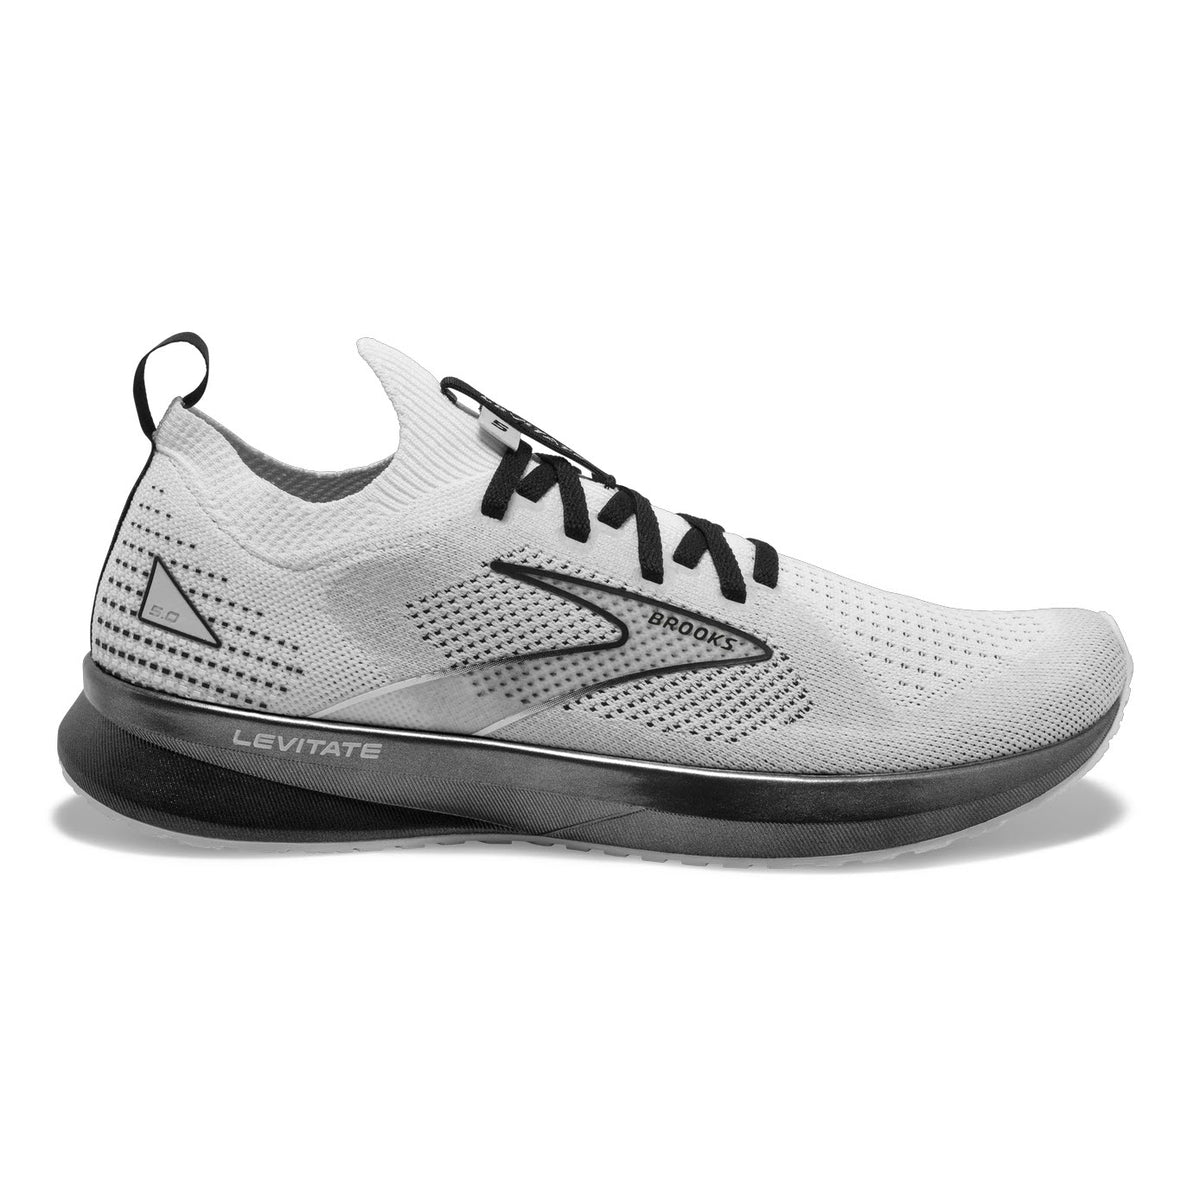 Side view of a white Brooks Levitate StealthFit White/Grey/Black- Mens Running Shoe against a white background.